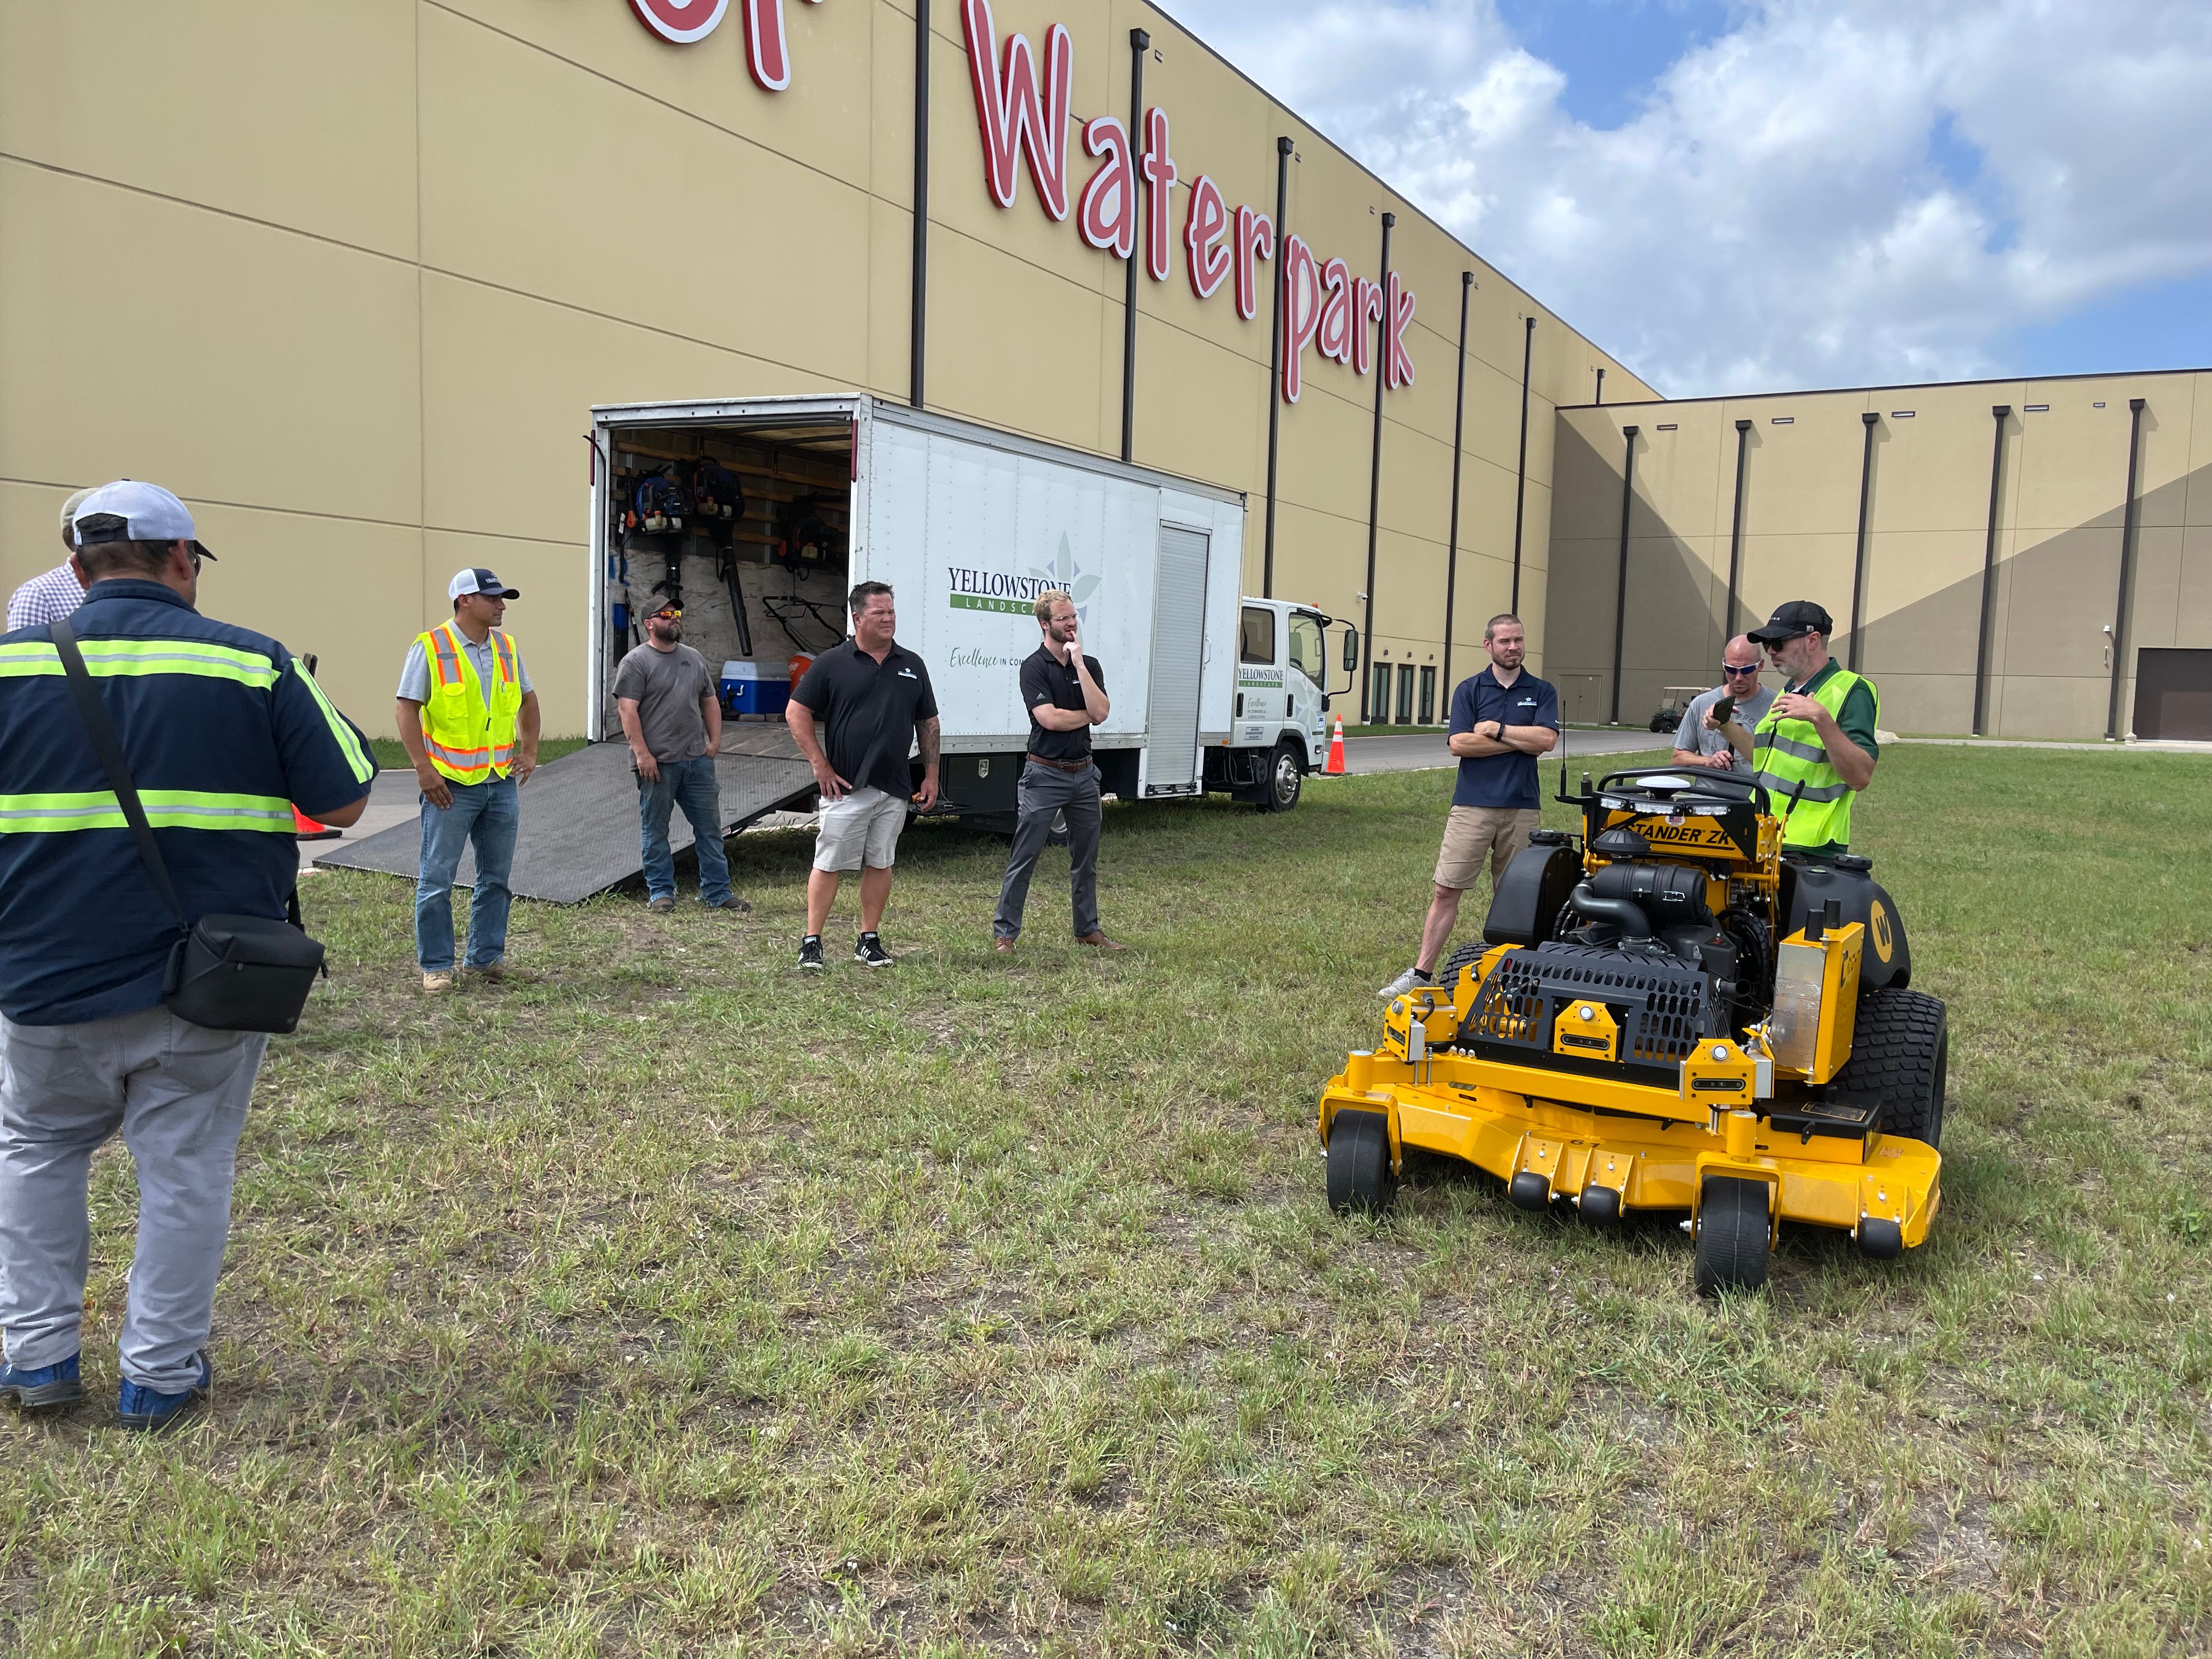 Crew testing and training on an electric mower